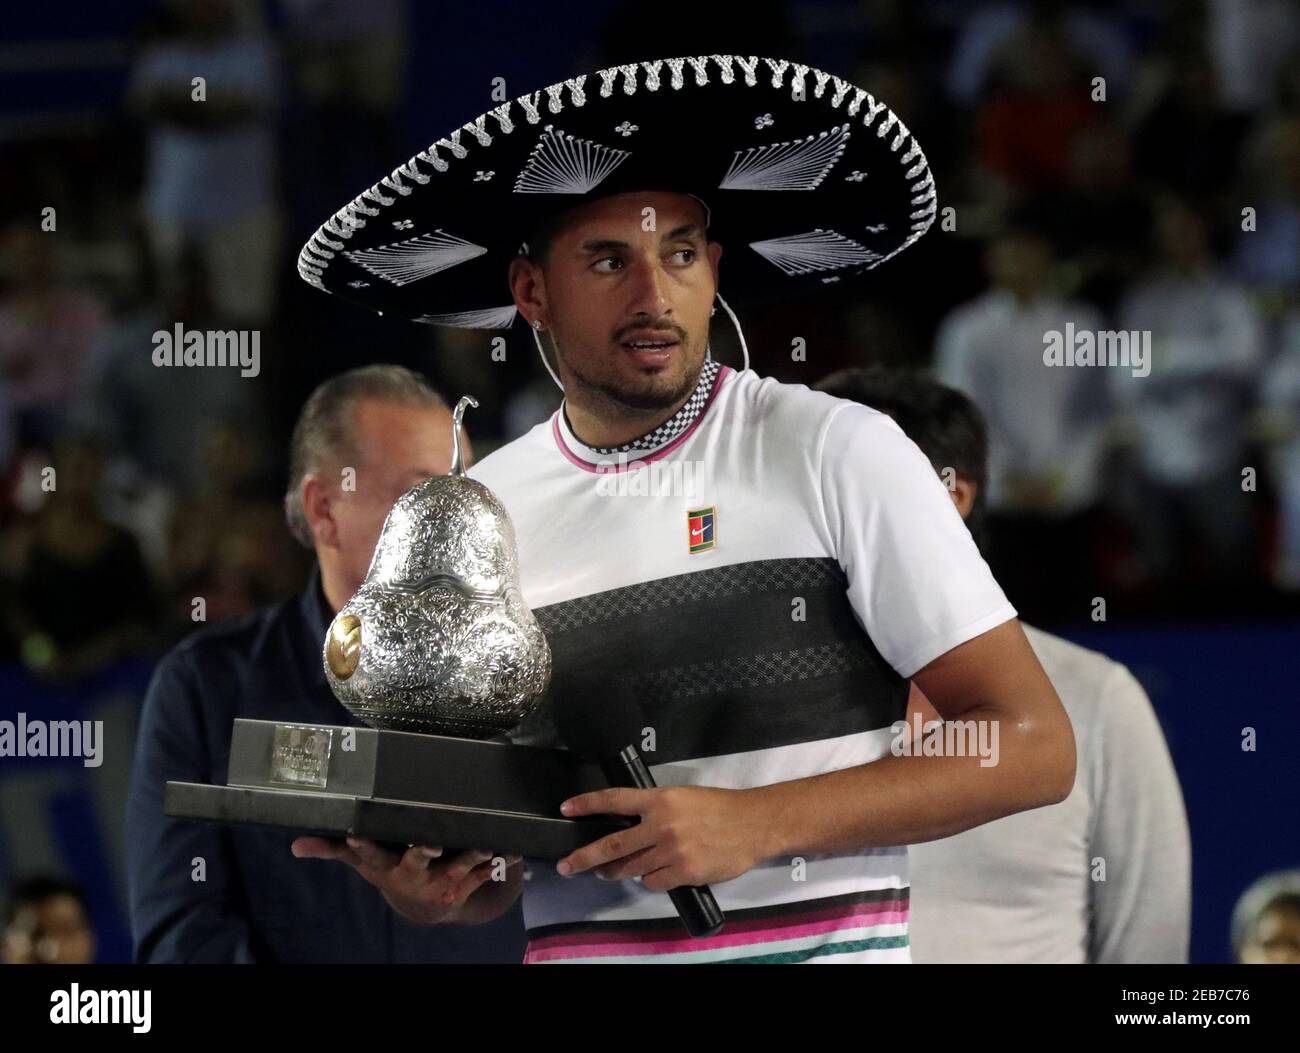 Tennis - ATP 500 - Acapulco Open, Acapulco, Mexico - March 2, 2019  Australia's Nick Kyrgios celebrates winning the Acapulco Open with the  trophy REUTERS/Henry Romero Stock Photo - Alamy